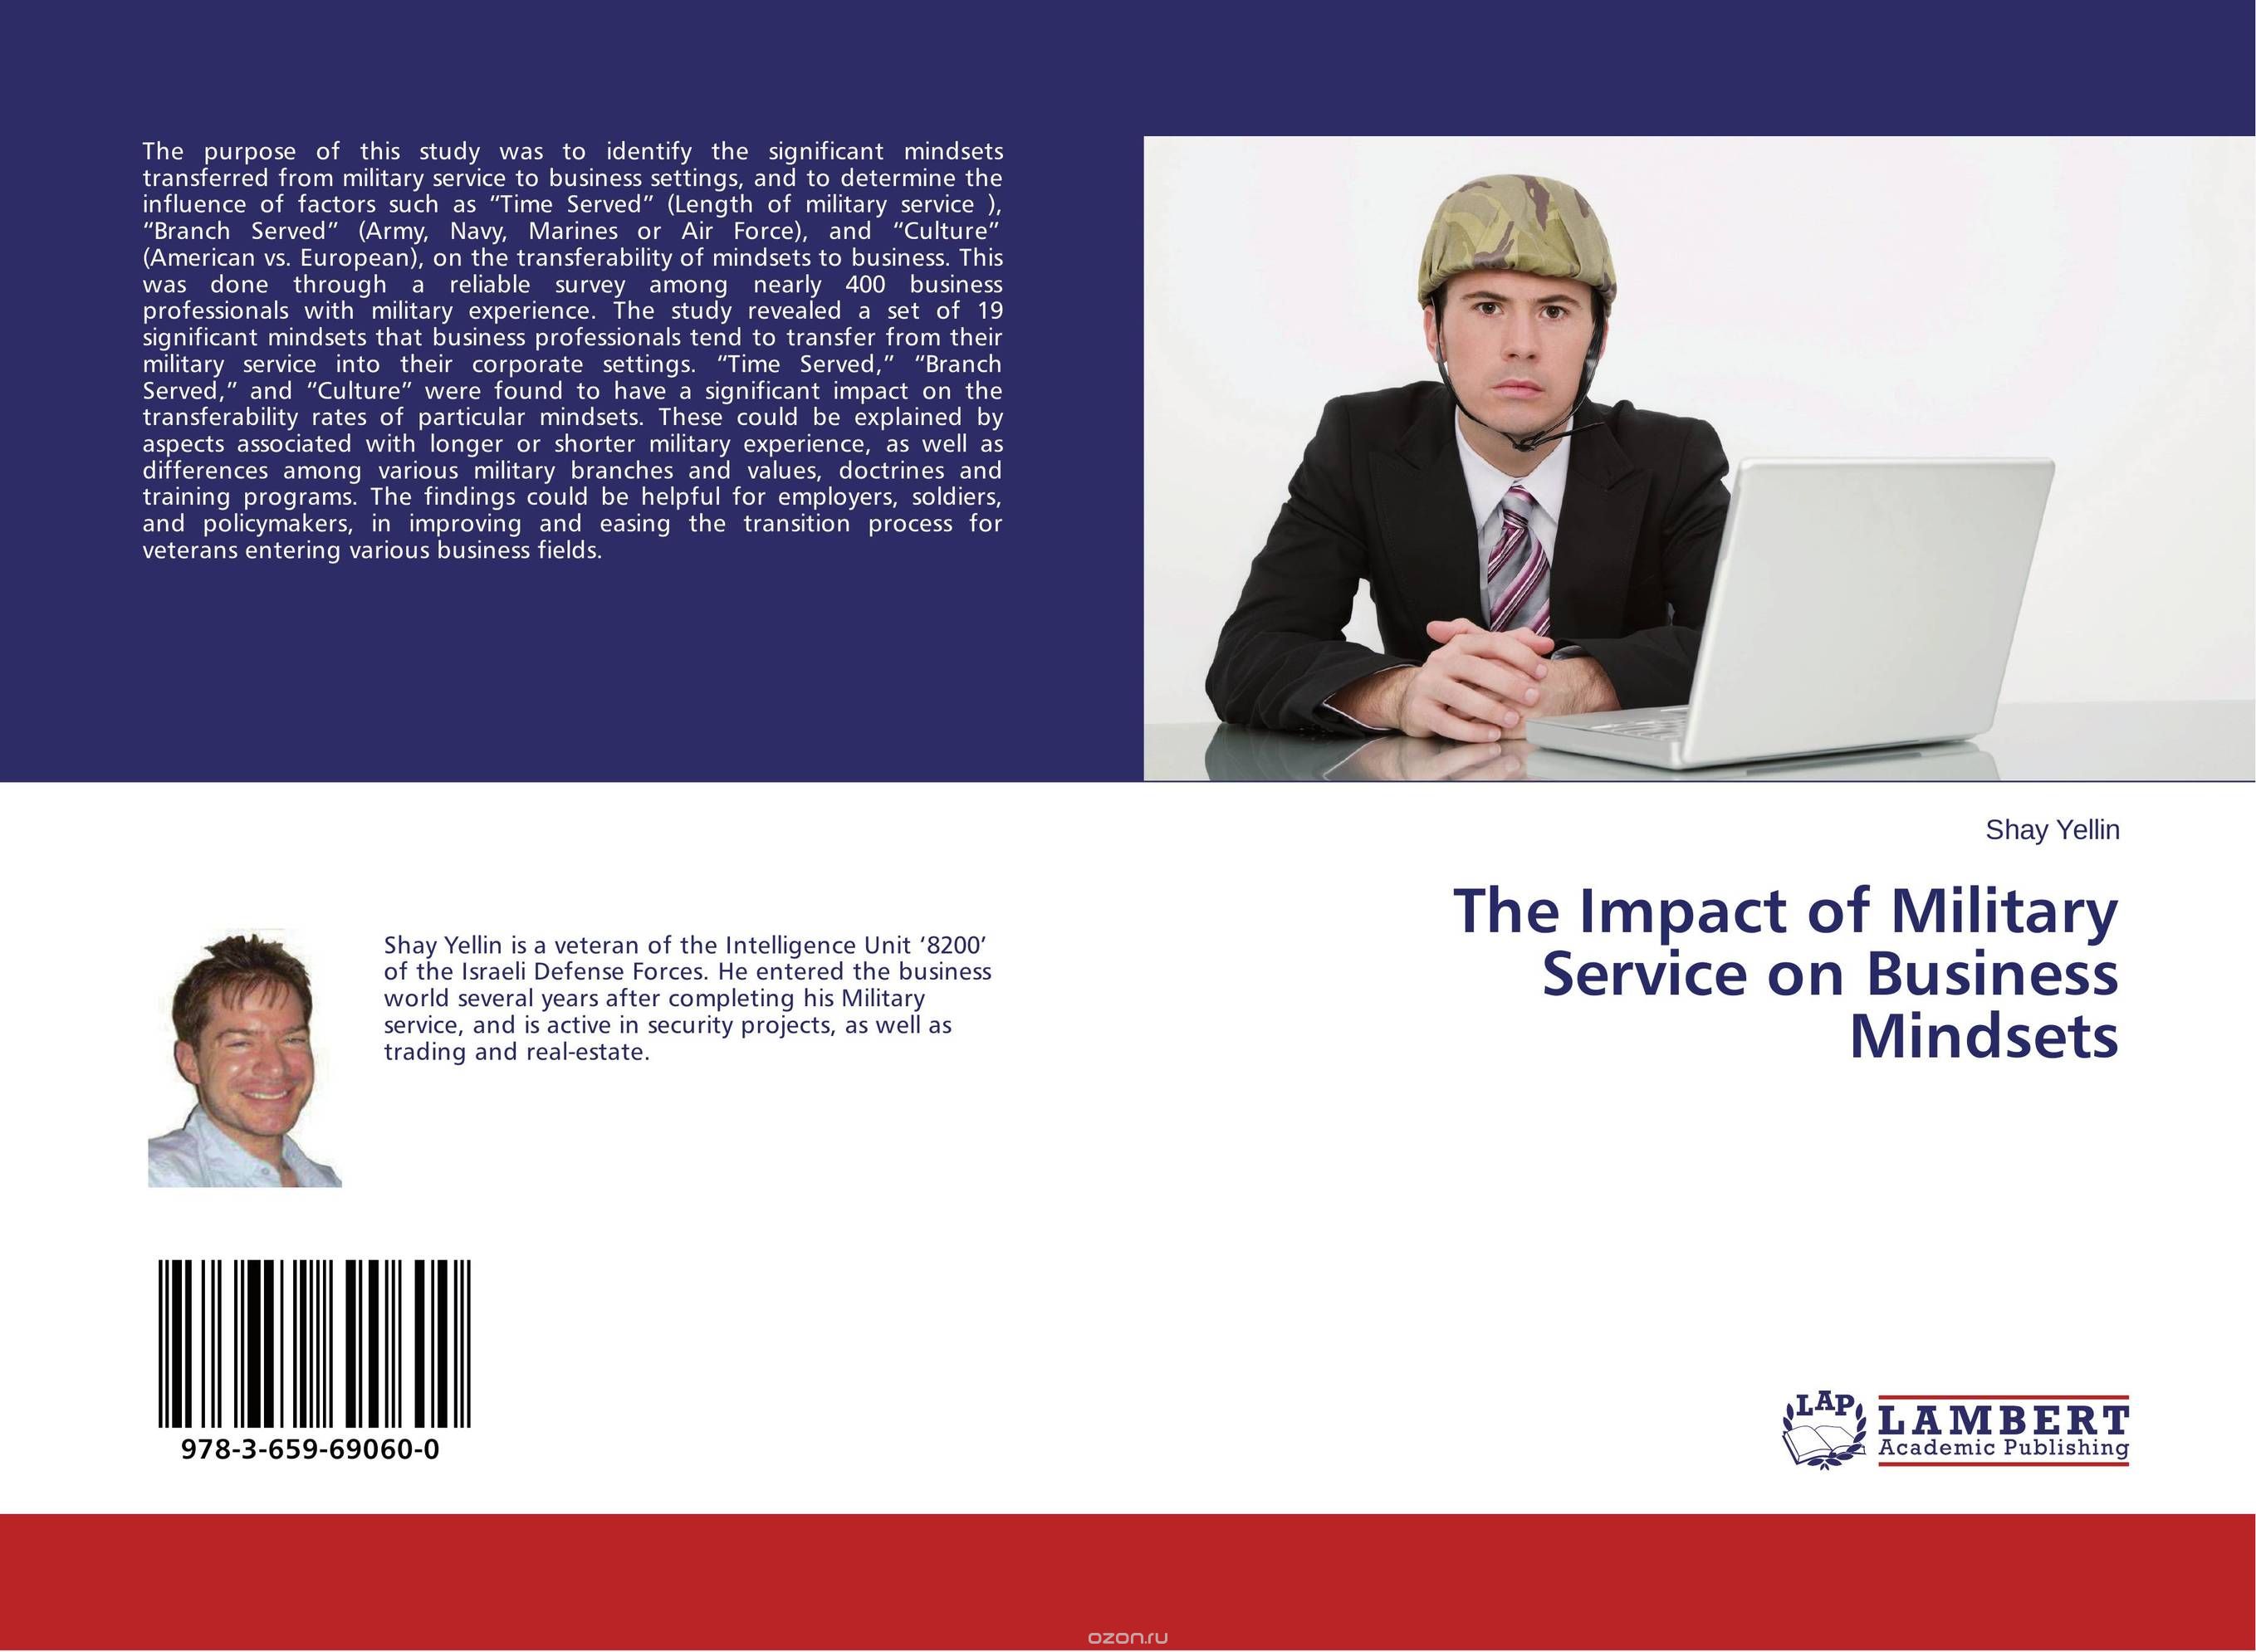 The Impact of Military Service on Business Mindsets